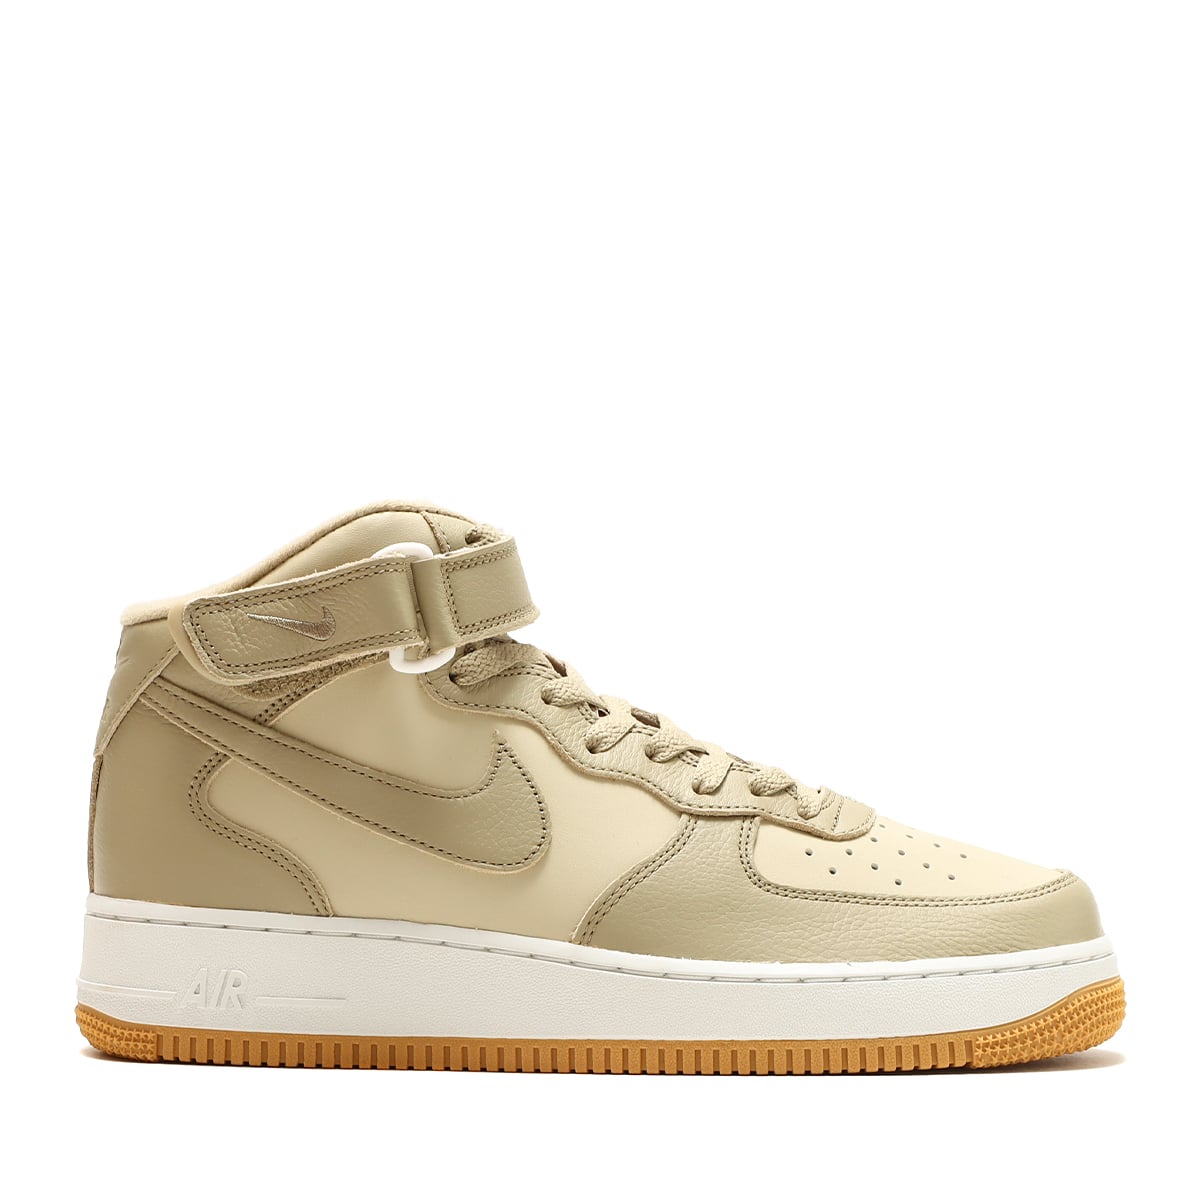 Nike Air Force 1 Mid LX "Our Force 1"メンズ